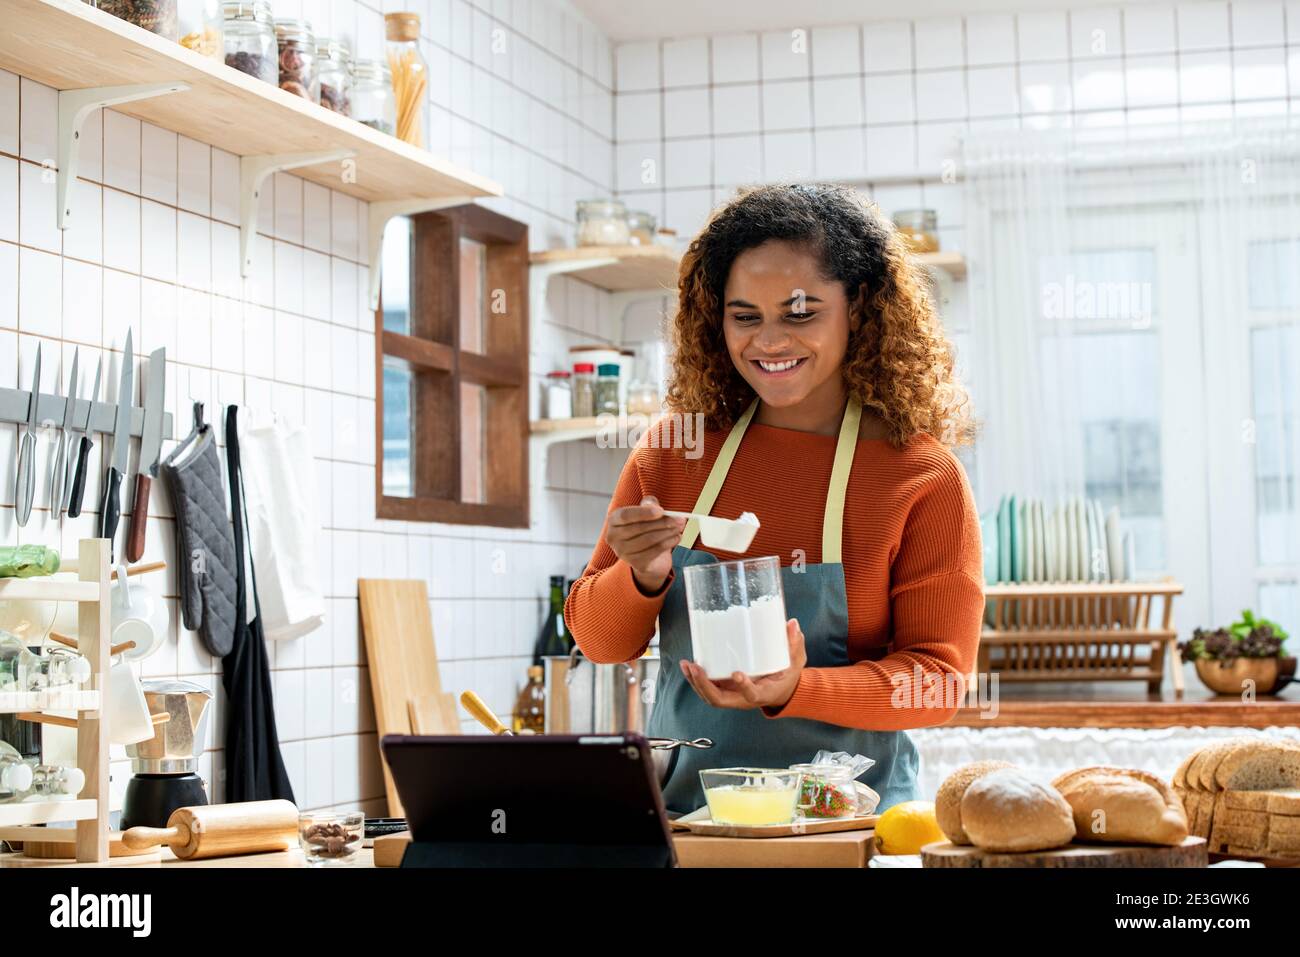 Young Afican American woman learning online  cooking class via tablet computer in kitchen at home Stock Photo